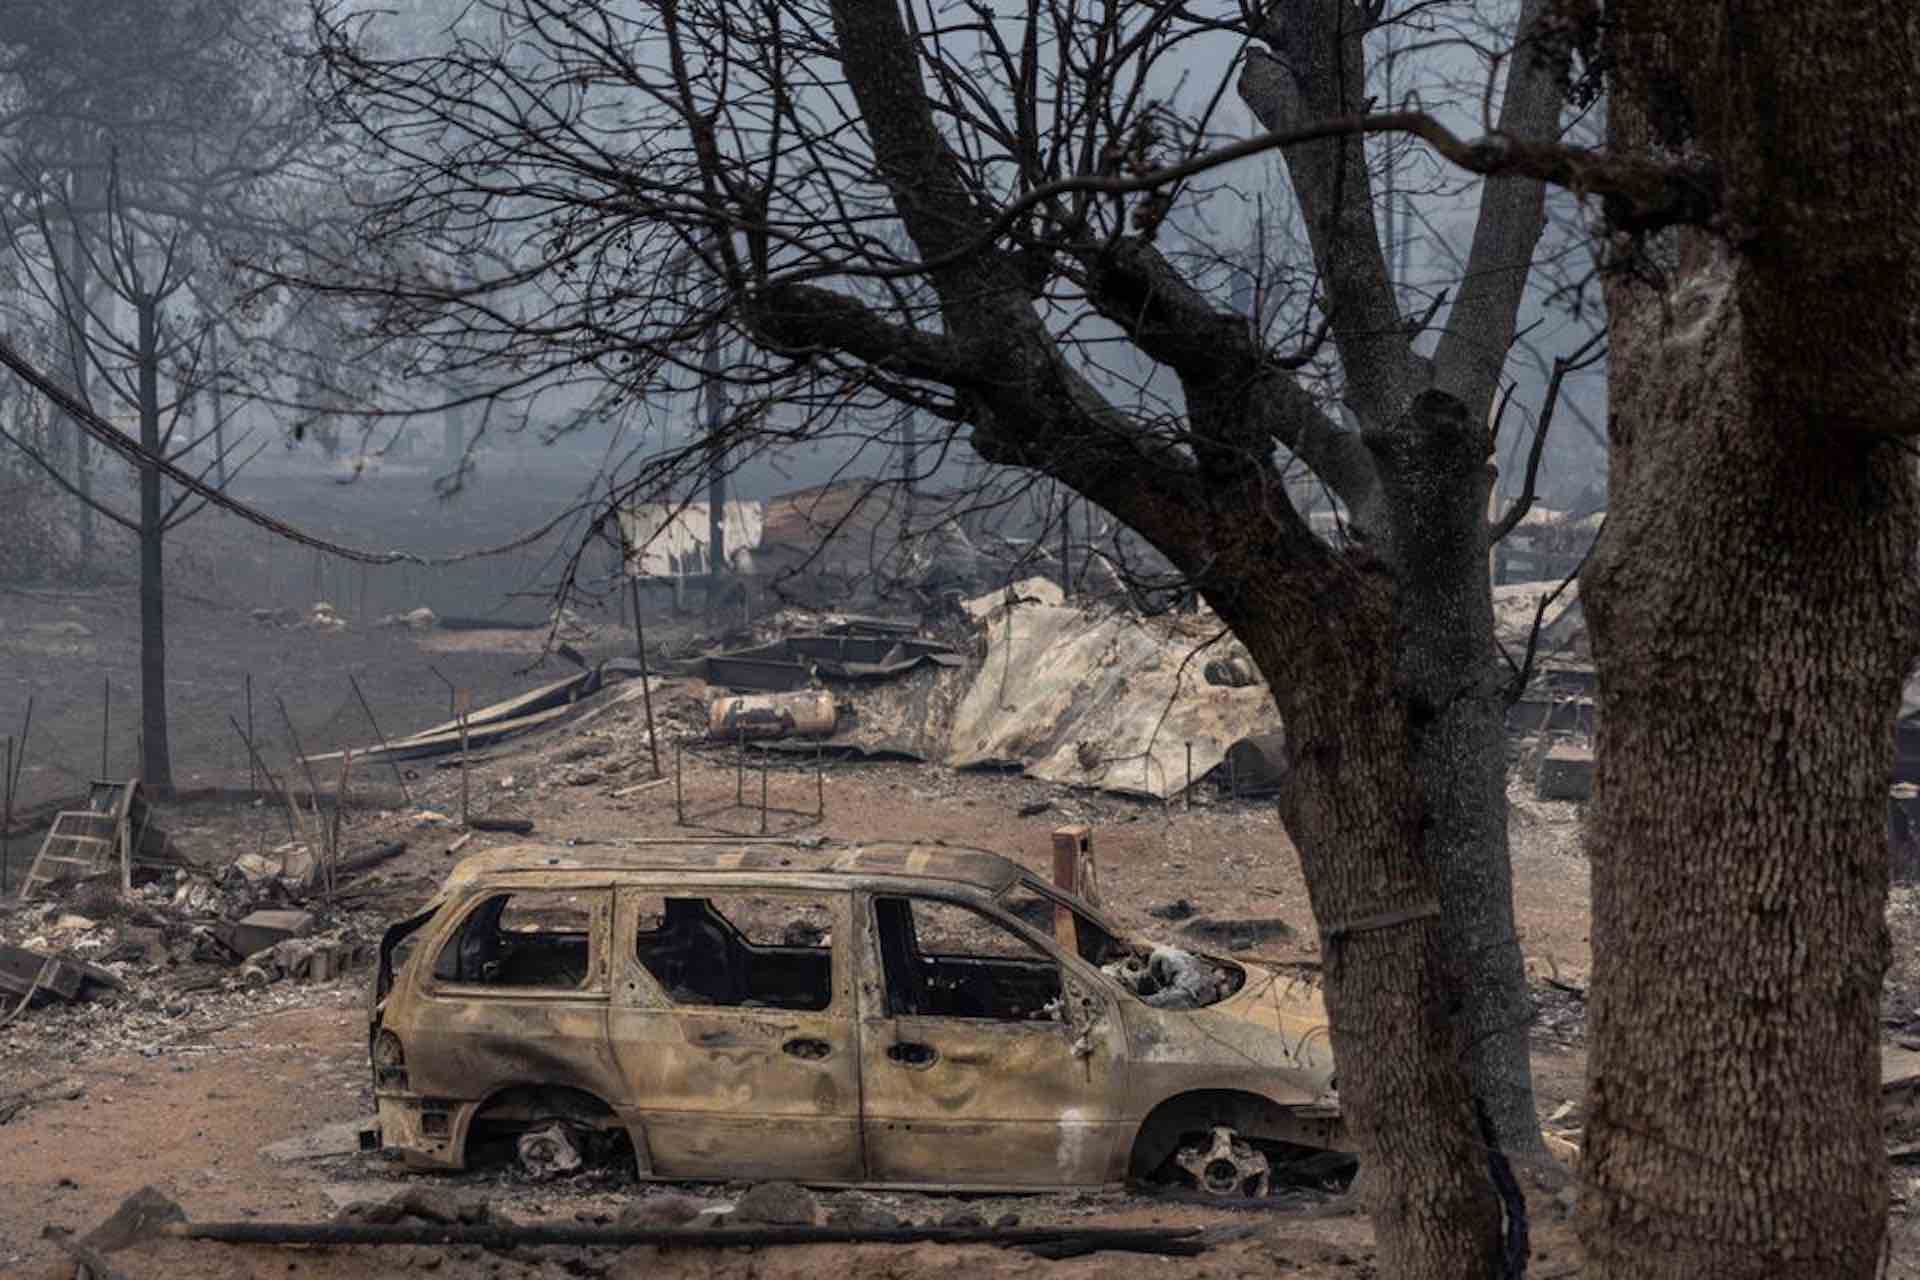 A forest fire in California kills two people, as rainfall helps put out the flames